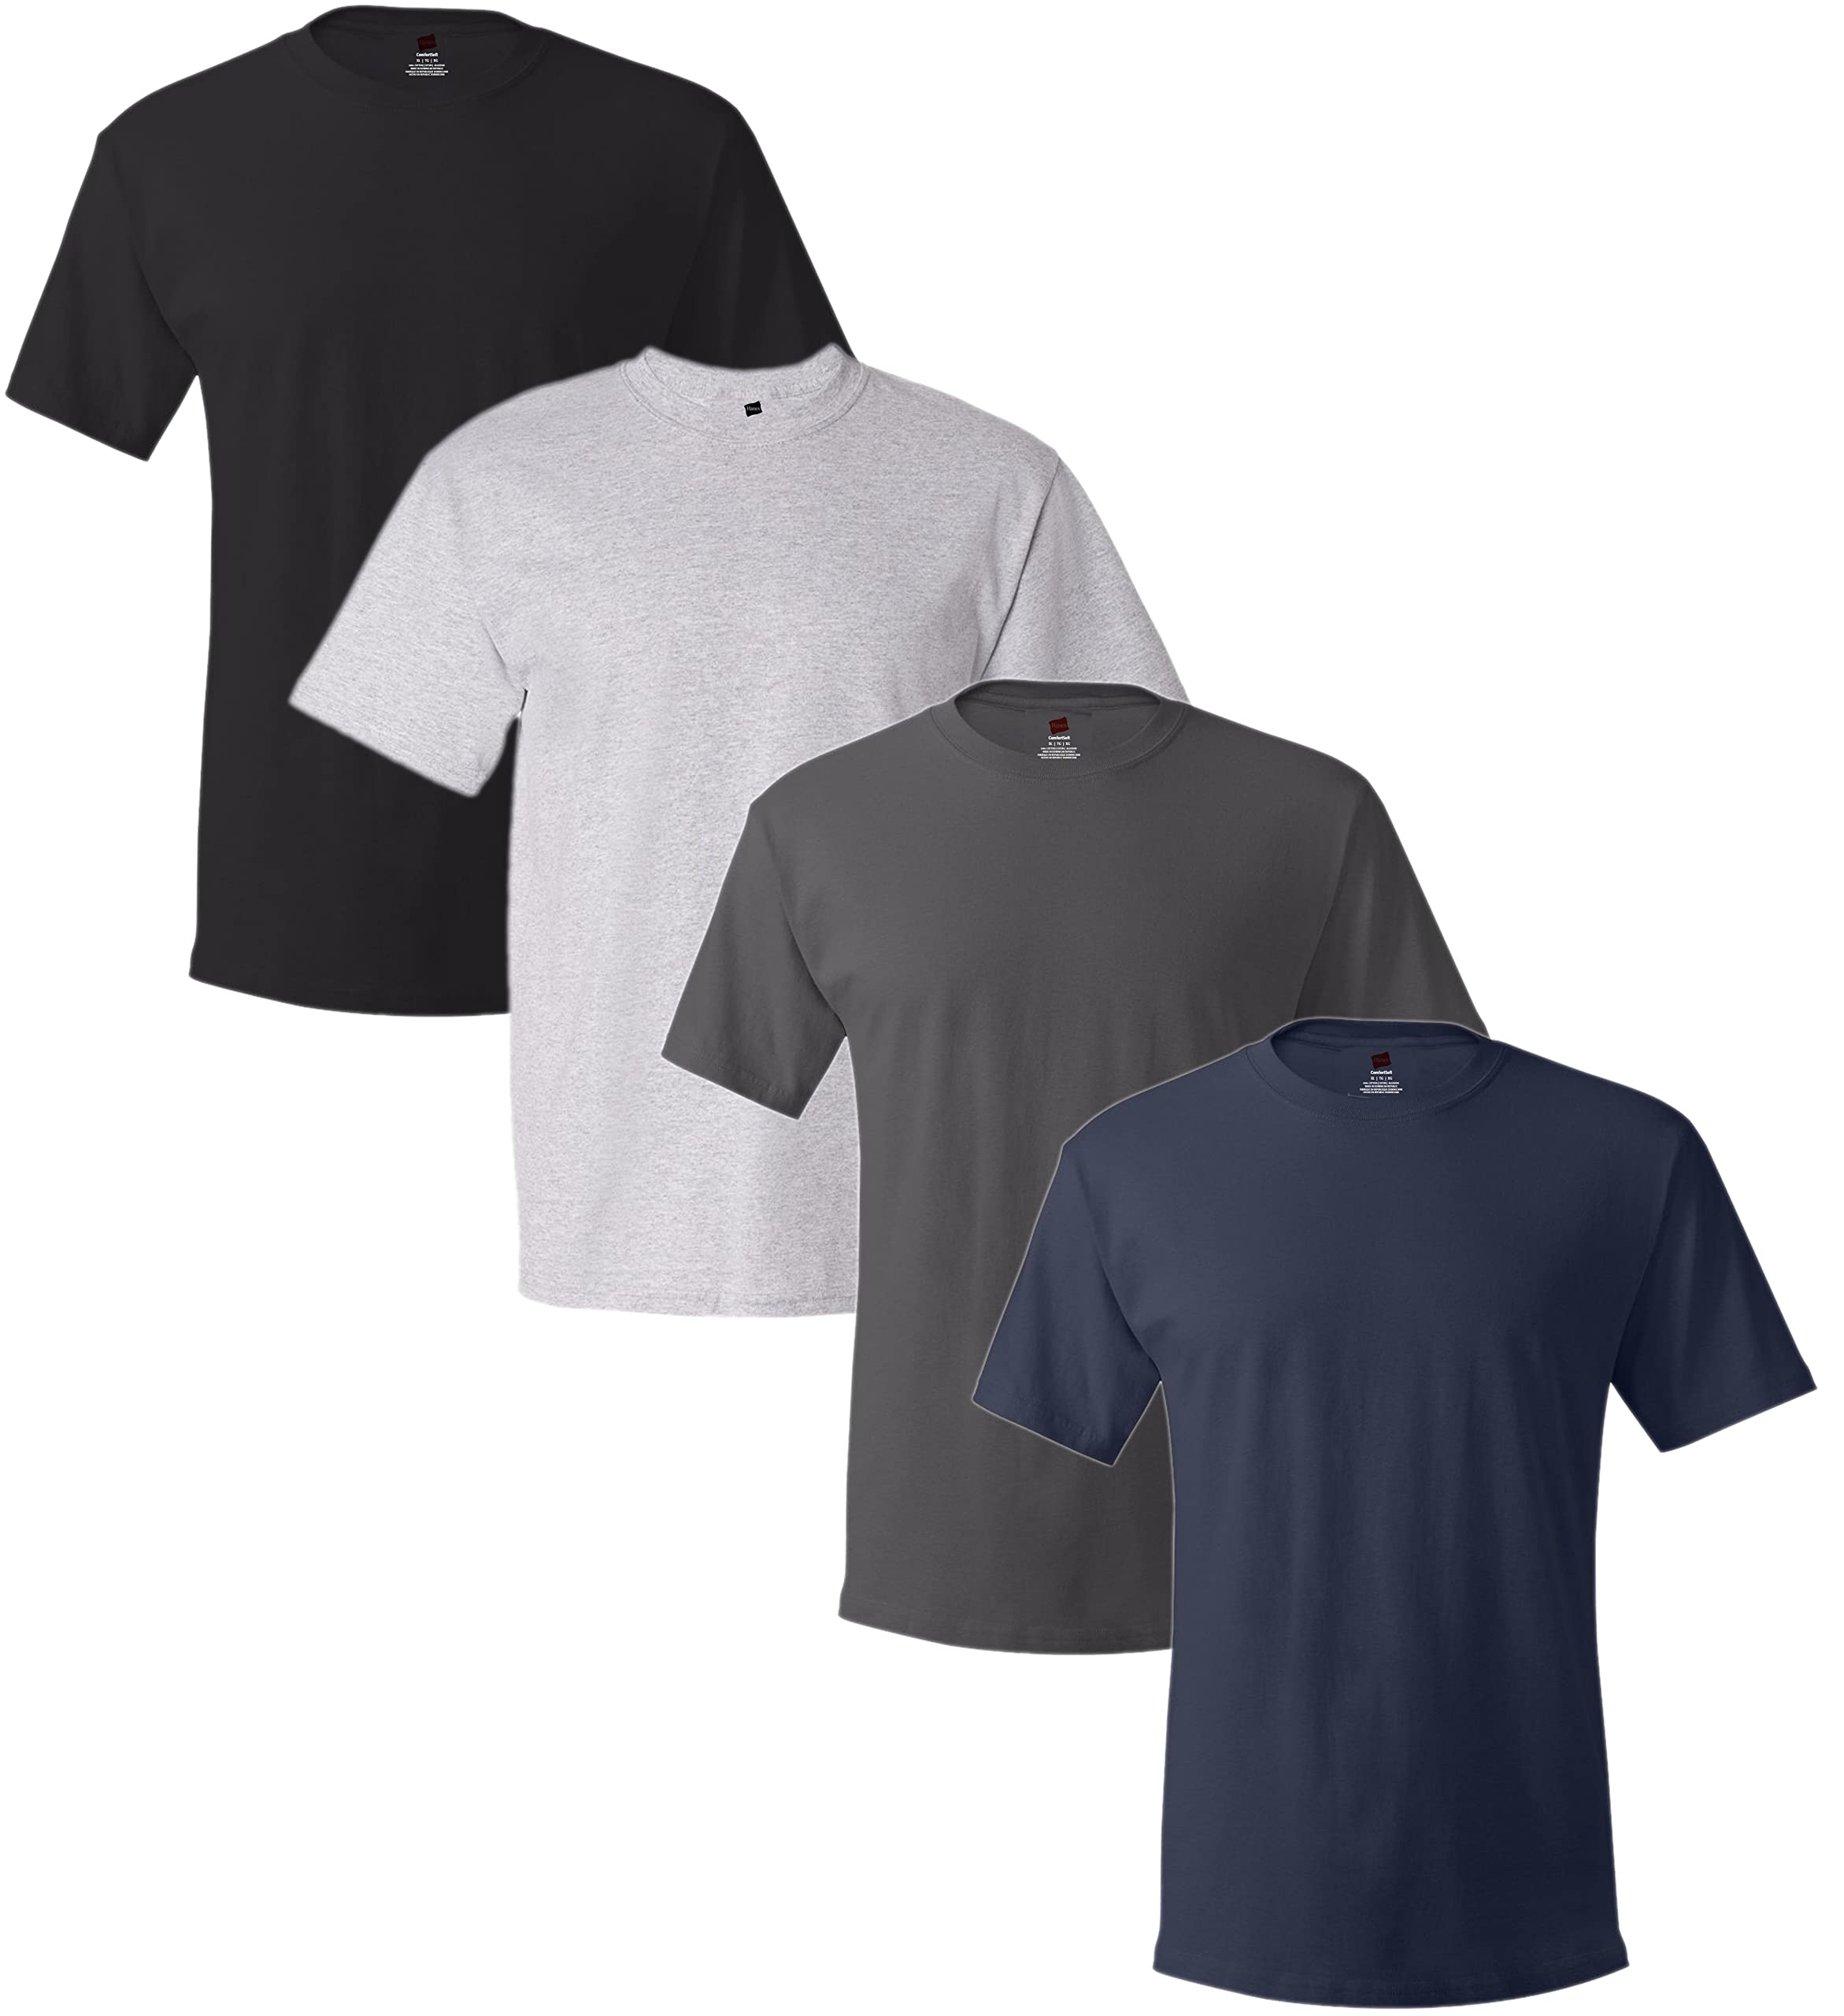 Hanes Men's ComfortSoft T-Shirt (Pack Of 4) (Assorted, Large)